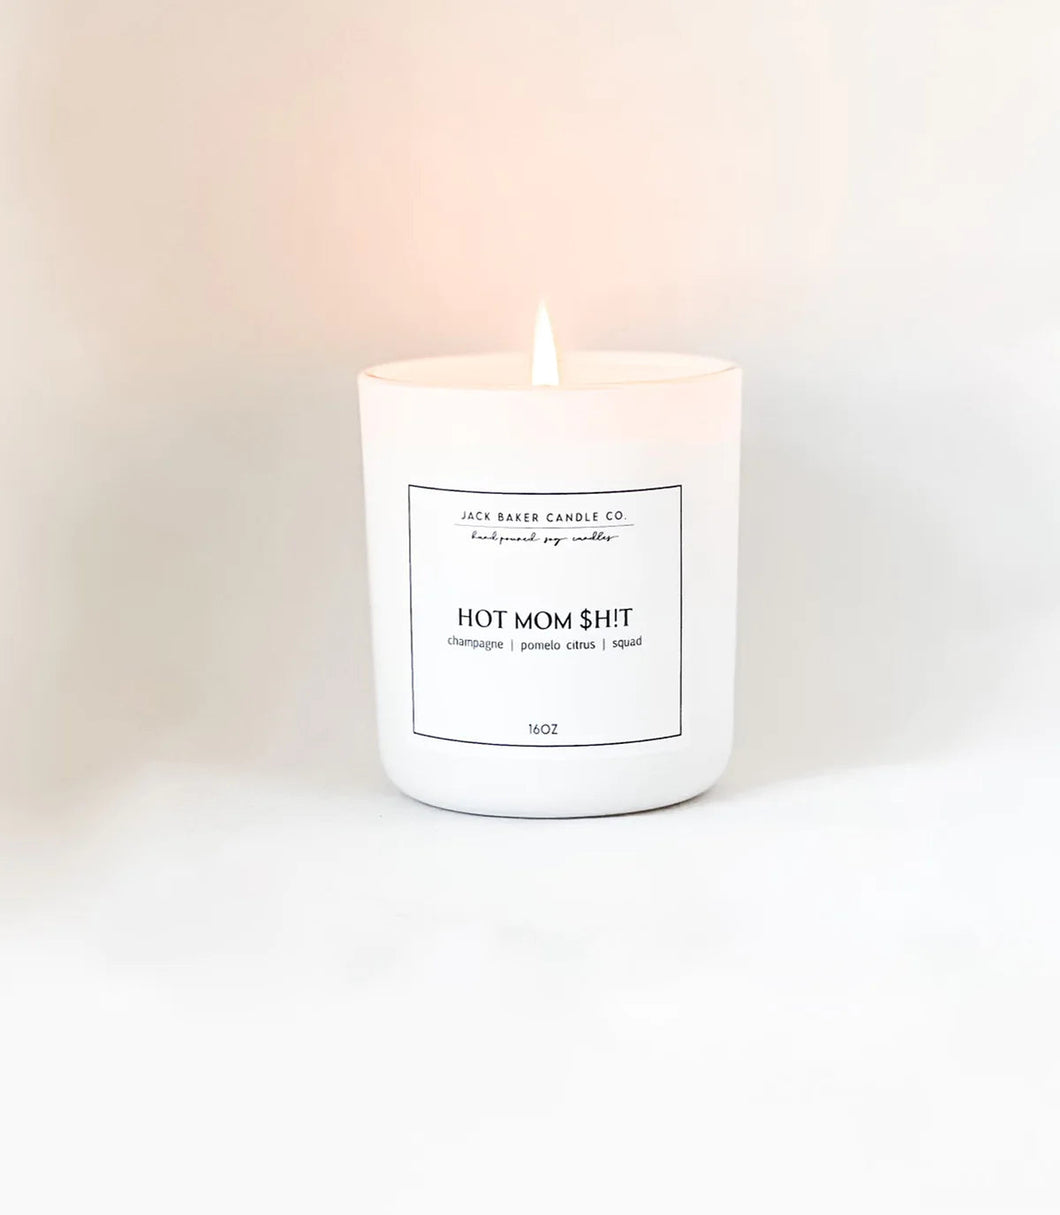 Hot Mom $hit Candle by Jack Baker Candle Co.